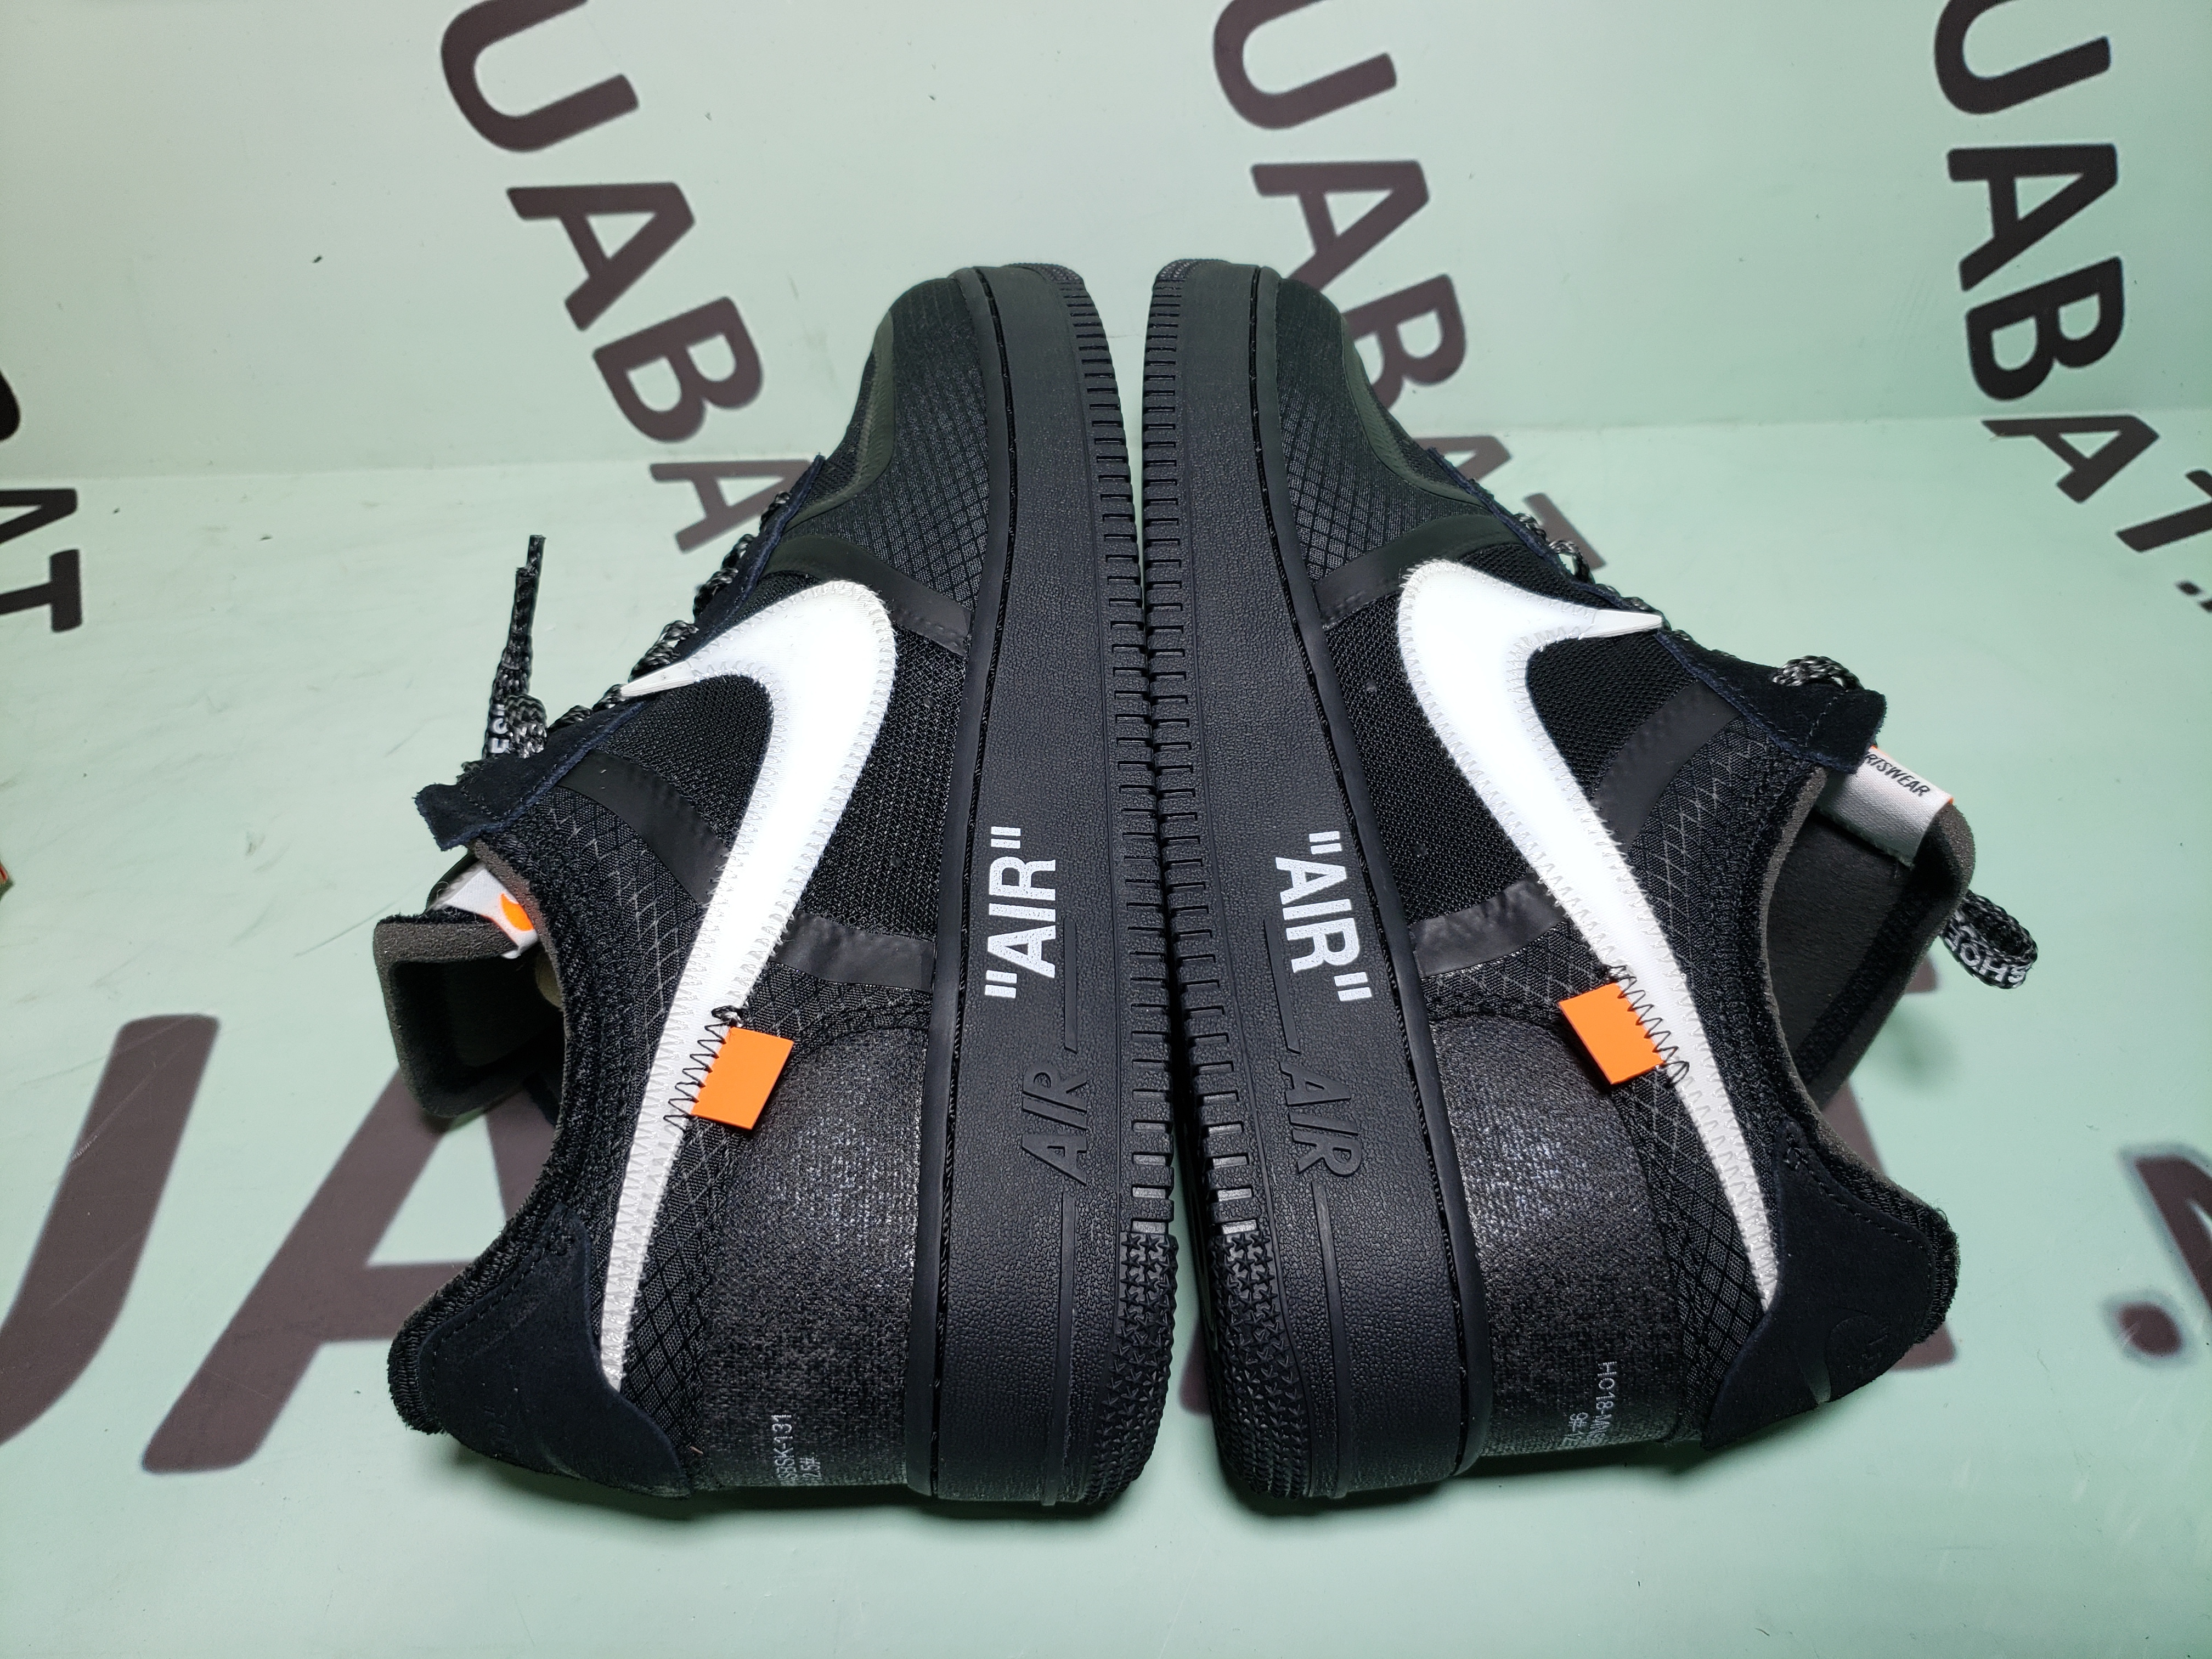 Buy Off-White x Air Force 1 Low 'Black' - AO4606 001 - Black